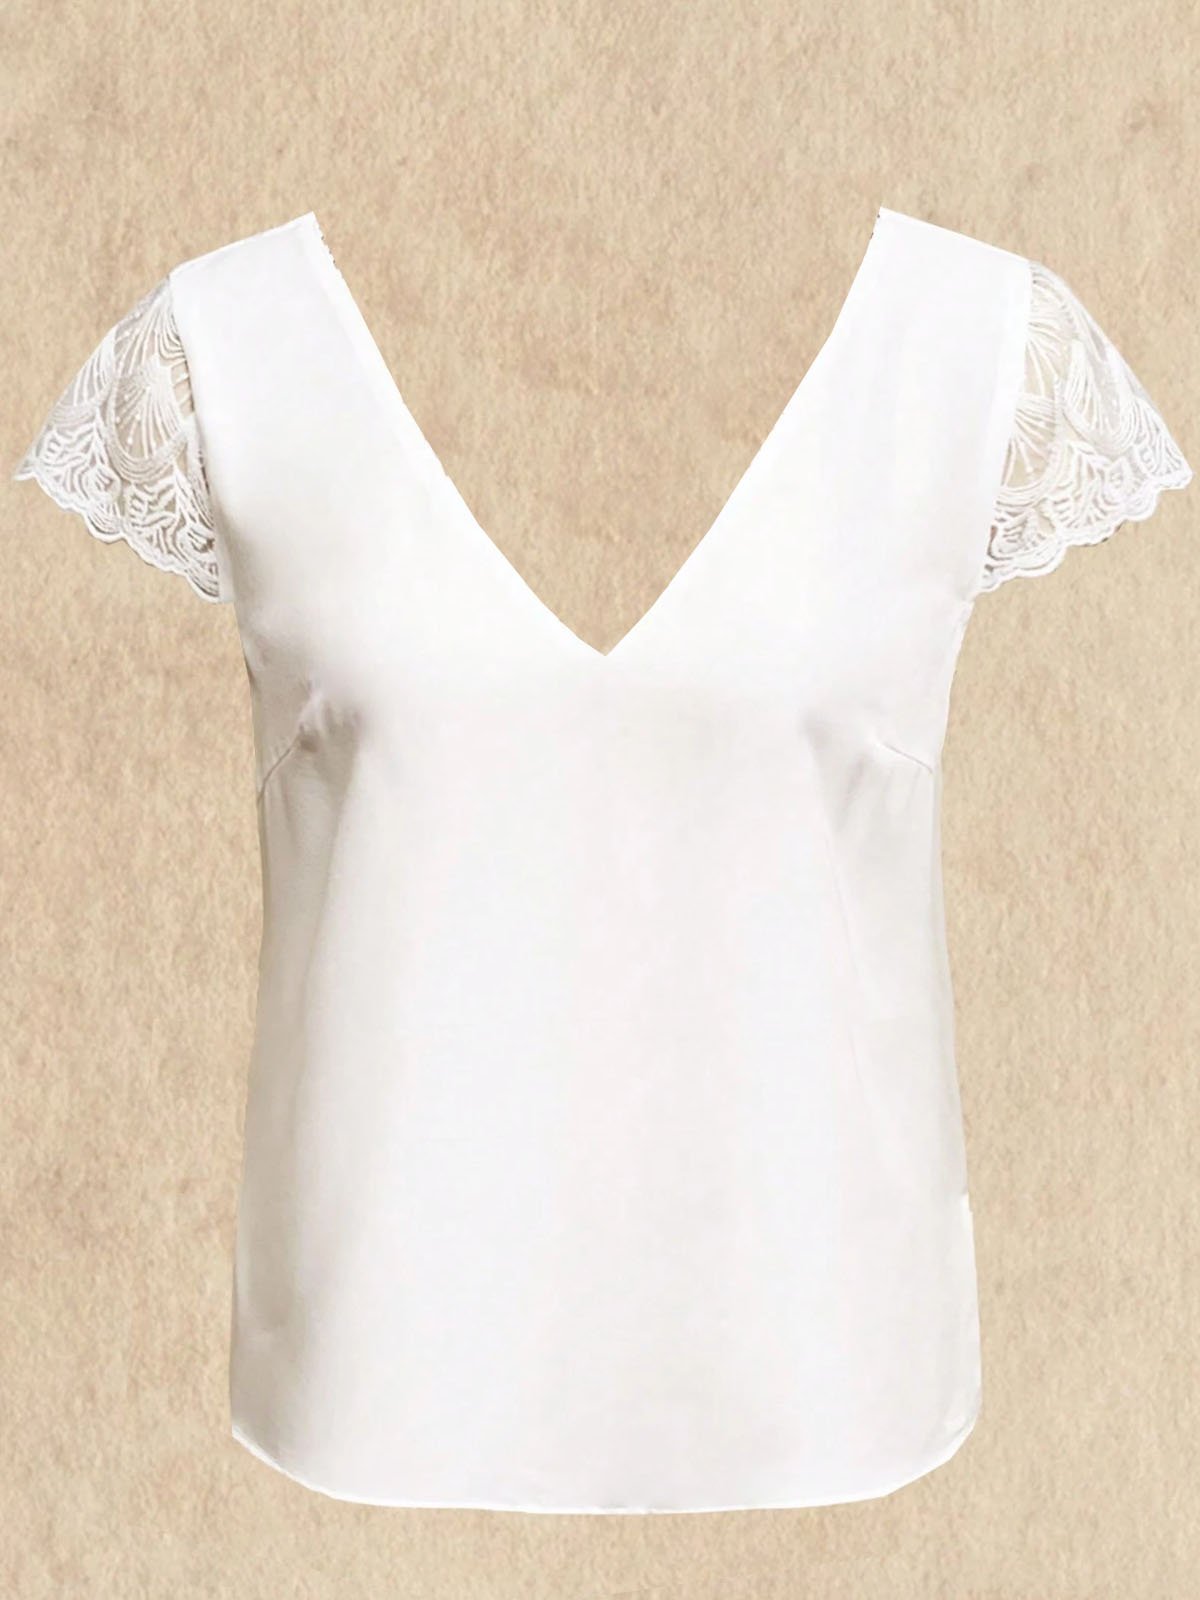 Women Lace Backless DesignSummer White Top